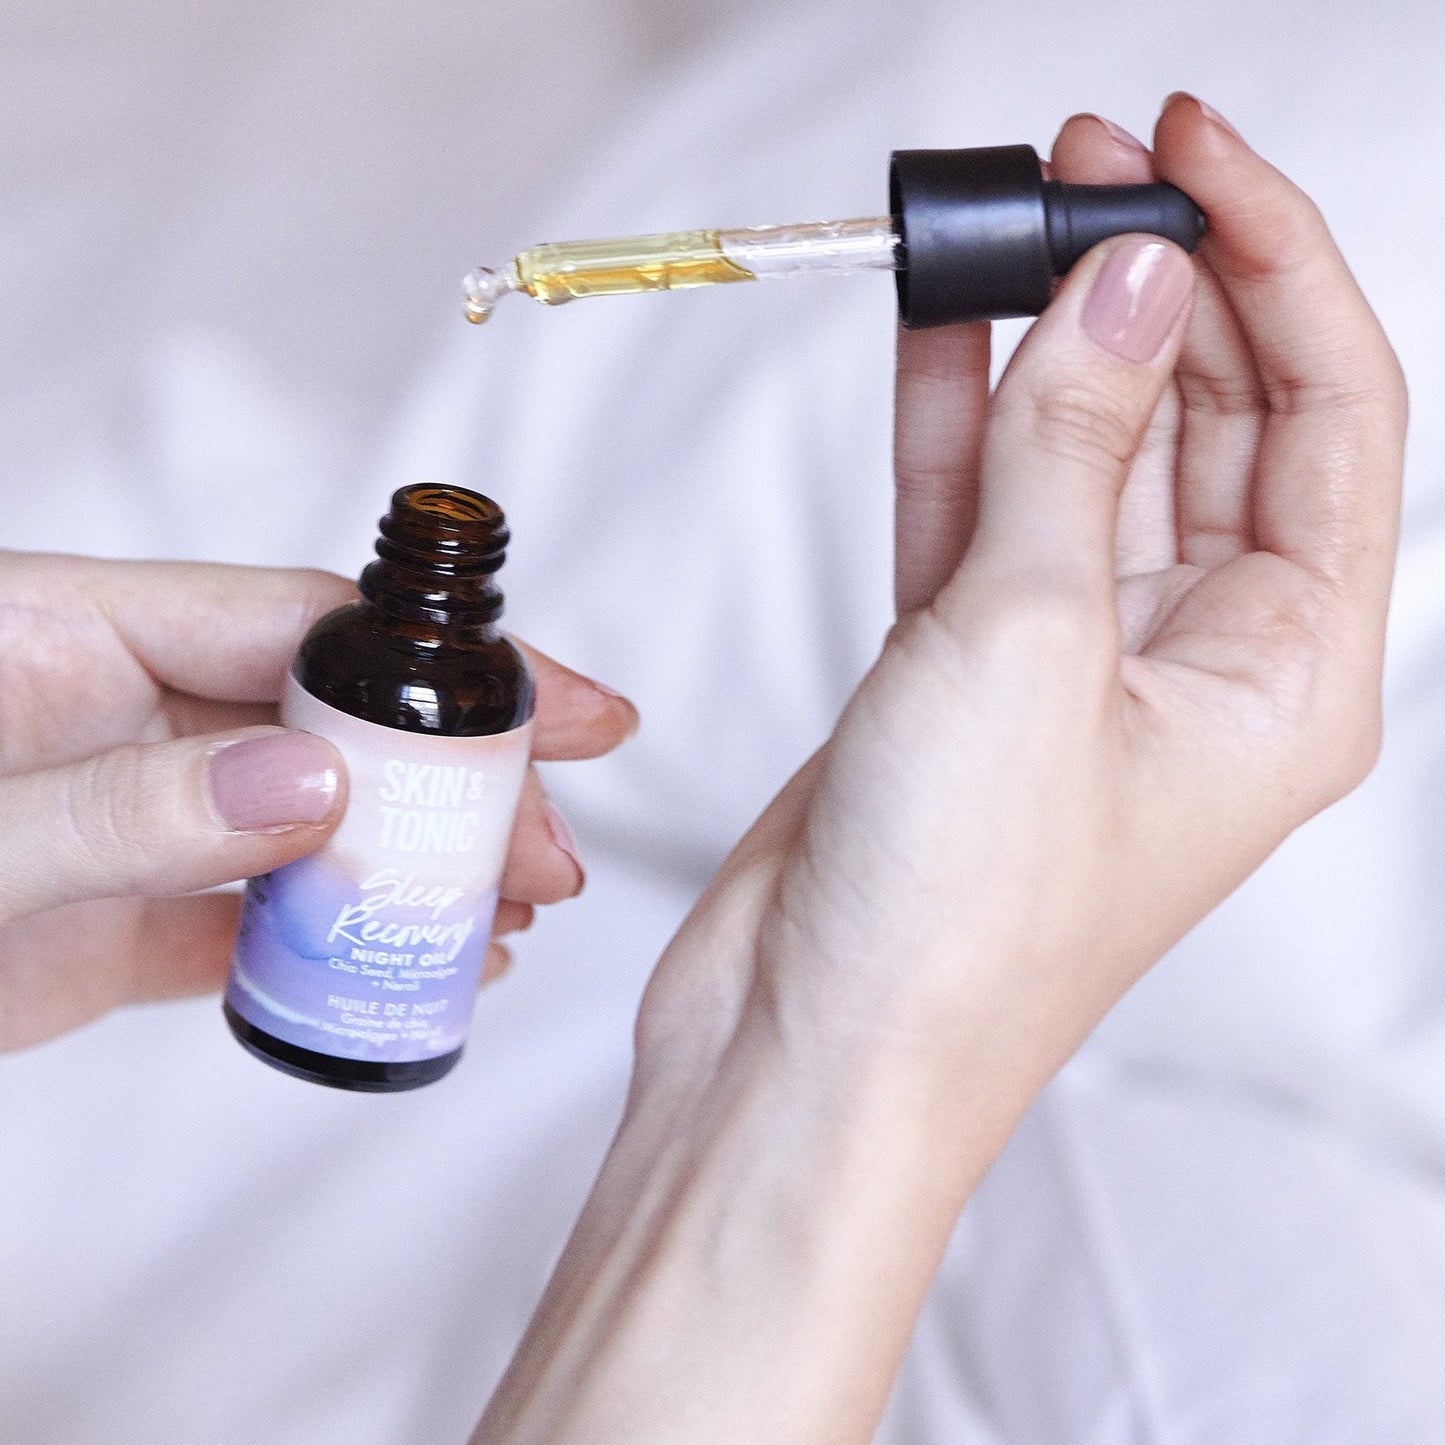 Skin & Tonic Sleep Recovery Night Oil | Sleep your way to beautiful skin | Soothes & Protects the skin | 100% Natural, Vegan & Cruelty Free